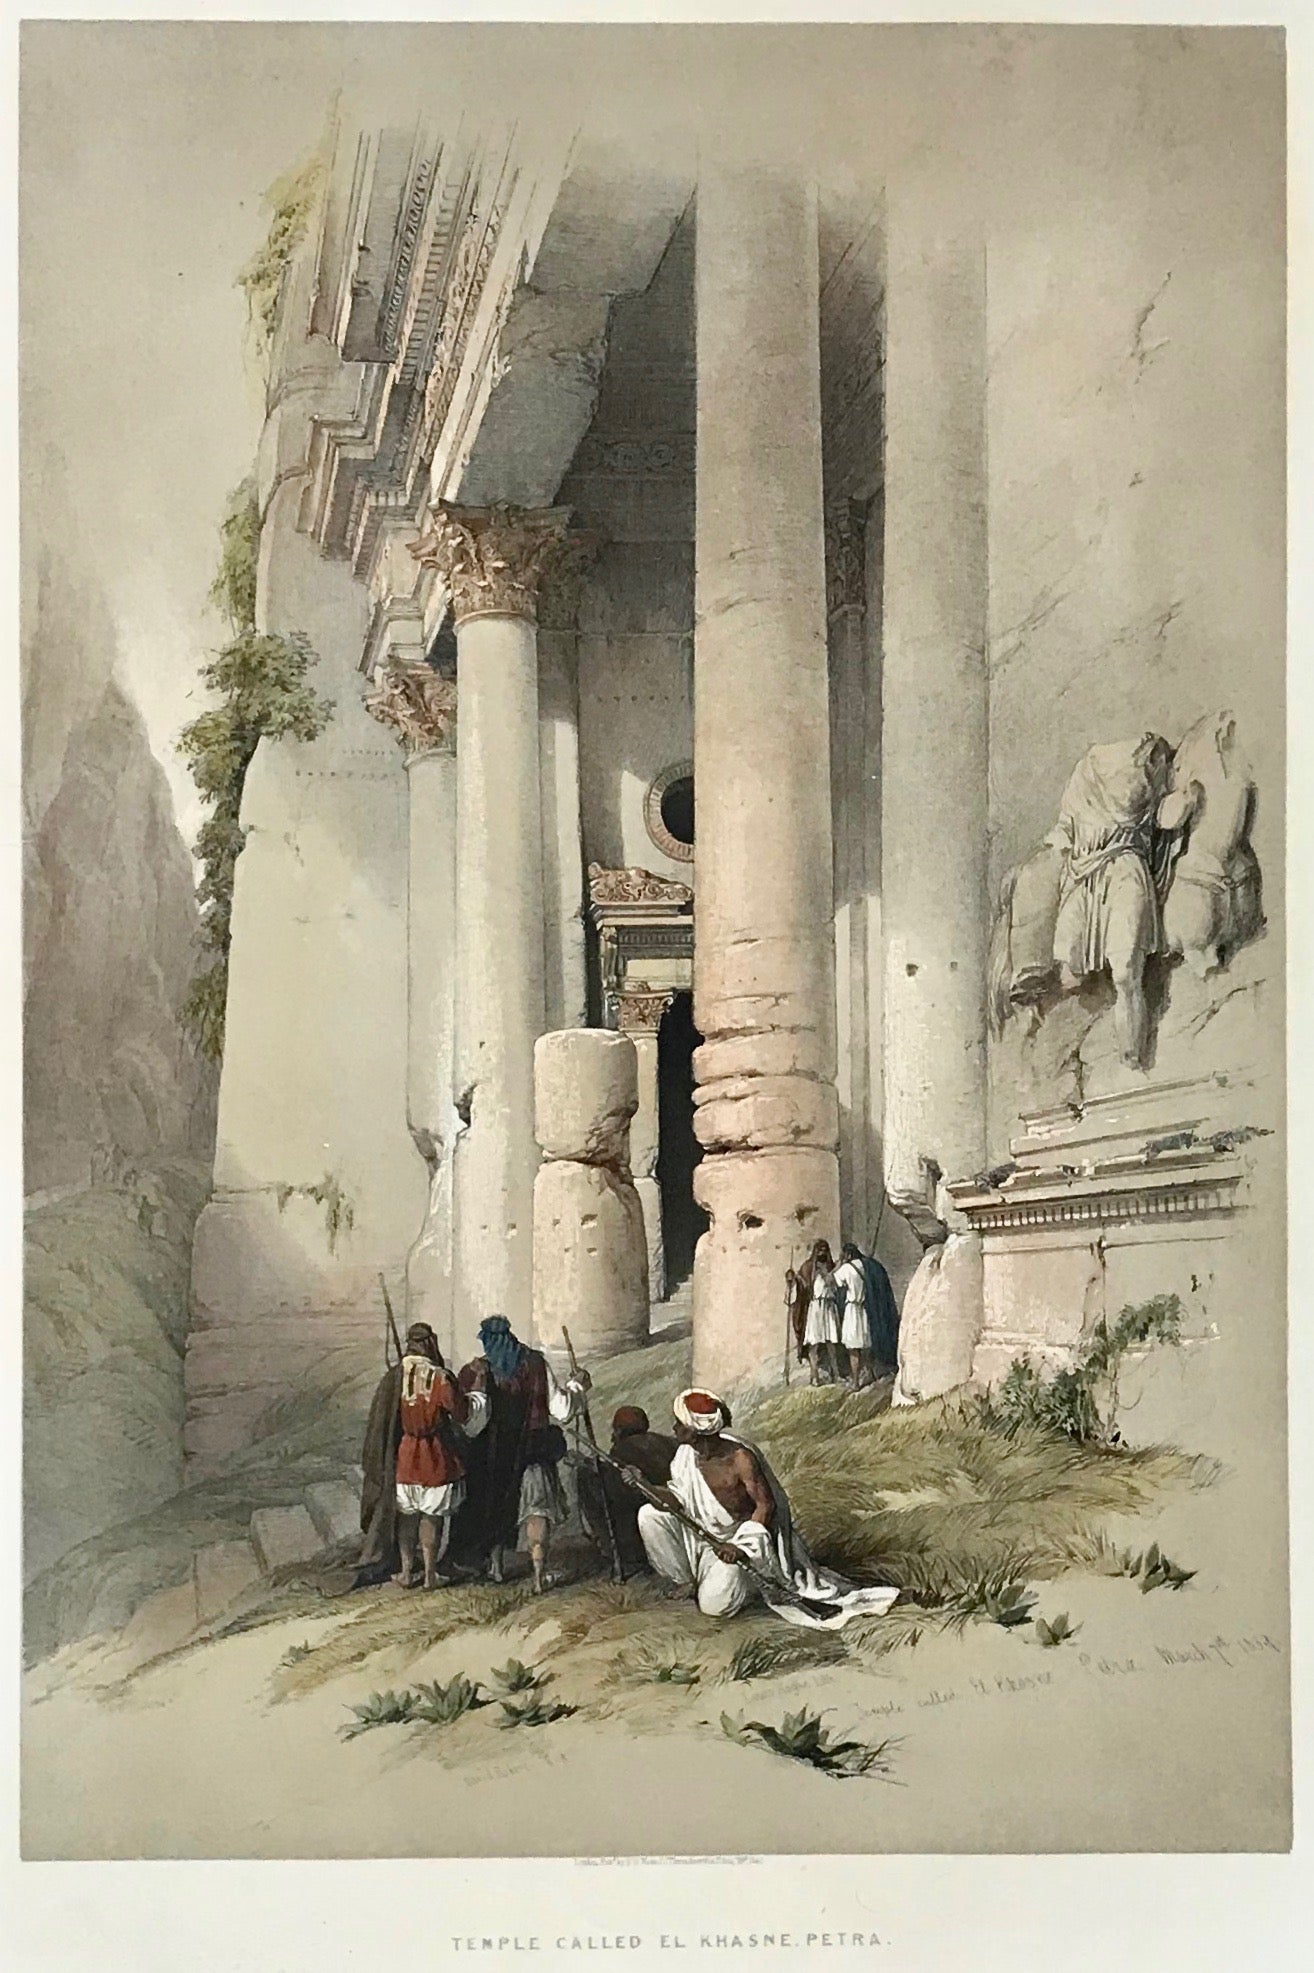 Original Antique Lithographs  by David Roberts  (1796 Edinburgh - London 1864)  "Temple called El Khasne, Petra".  Lithograph by Louis Haghe after painting by David Roberts. With background plate and finely done modern hand coloring. Titled, dated "Petra, March 7th 1839" and signed "David Roberts R.A." in plate.  Clean, very good image impression. Three margins wide, left margin narrow. Published by Moon. London, 1842.  48.8 x 33.7 cm (19.2 x 13.3")